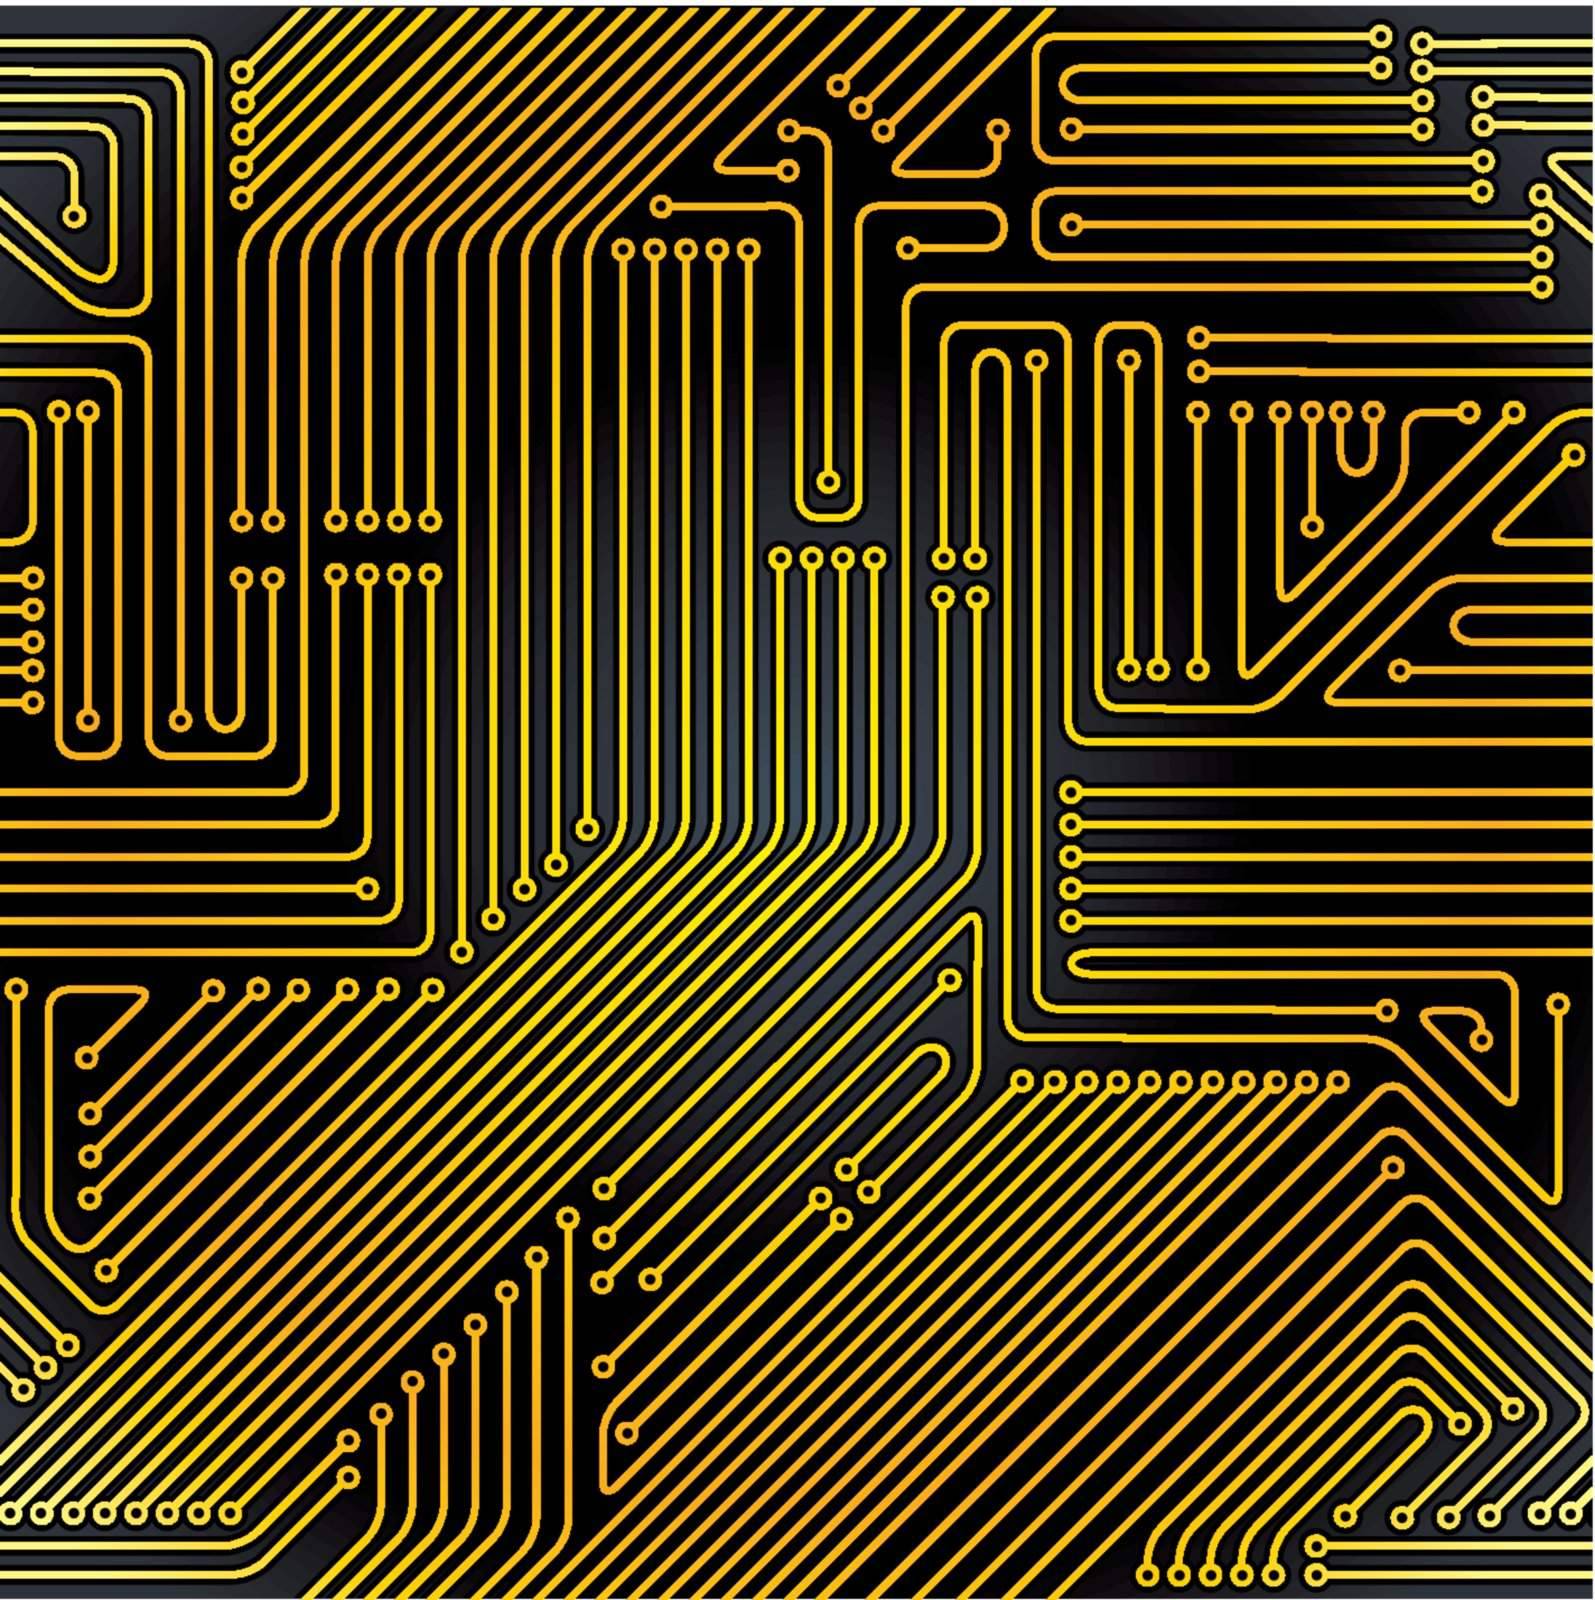 Computer circuit board seamless pattern. Computer electronic technology vector background.